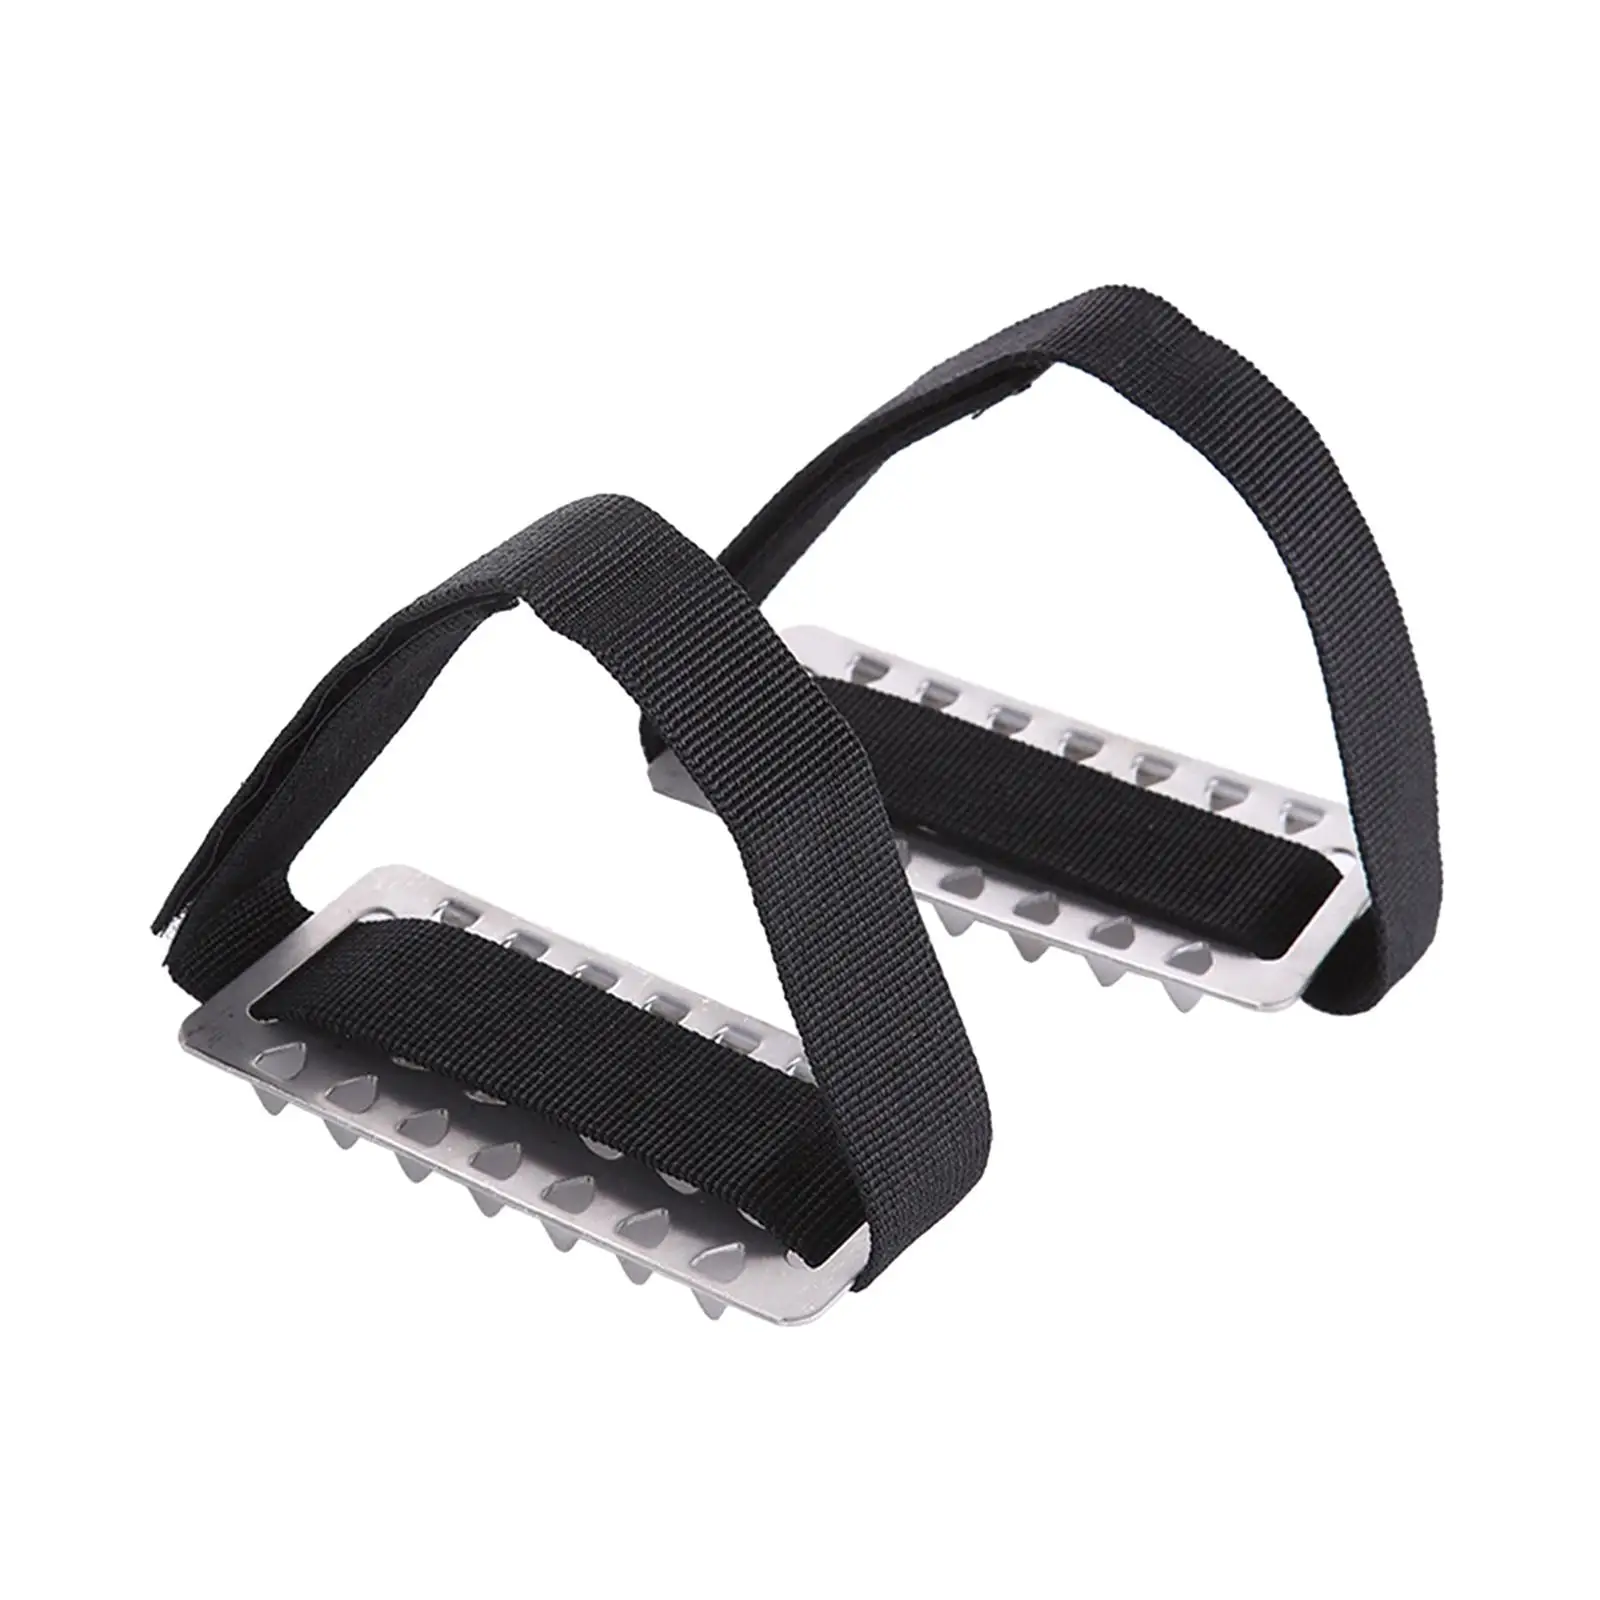 Shoe Spikes for Footwear Antiskid Shoe Claws Shoe Crampons for Snow and Ice for